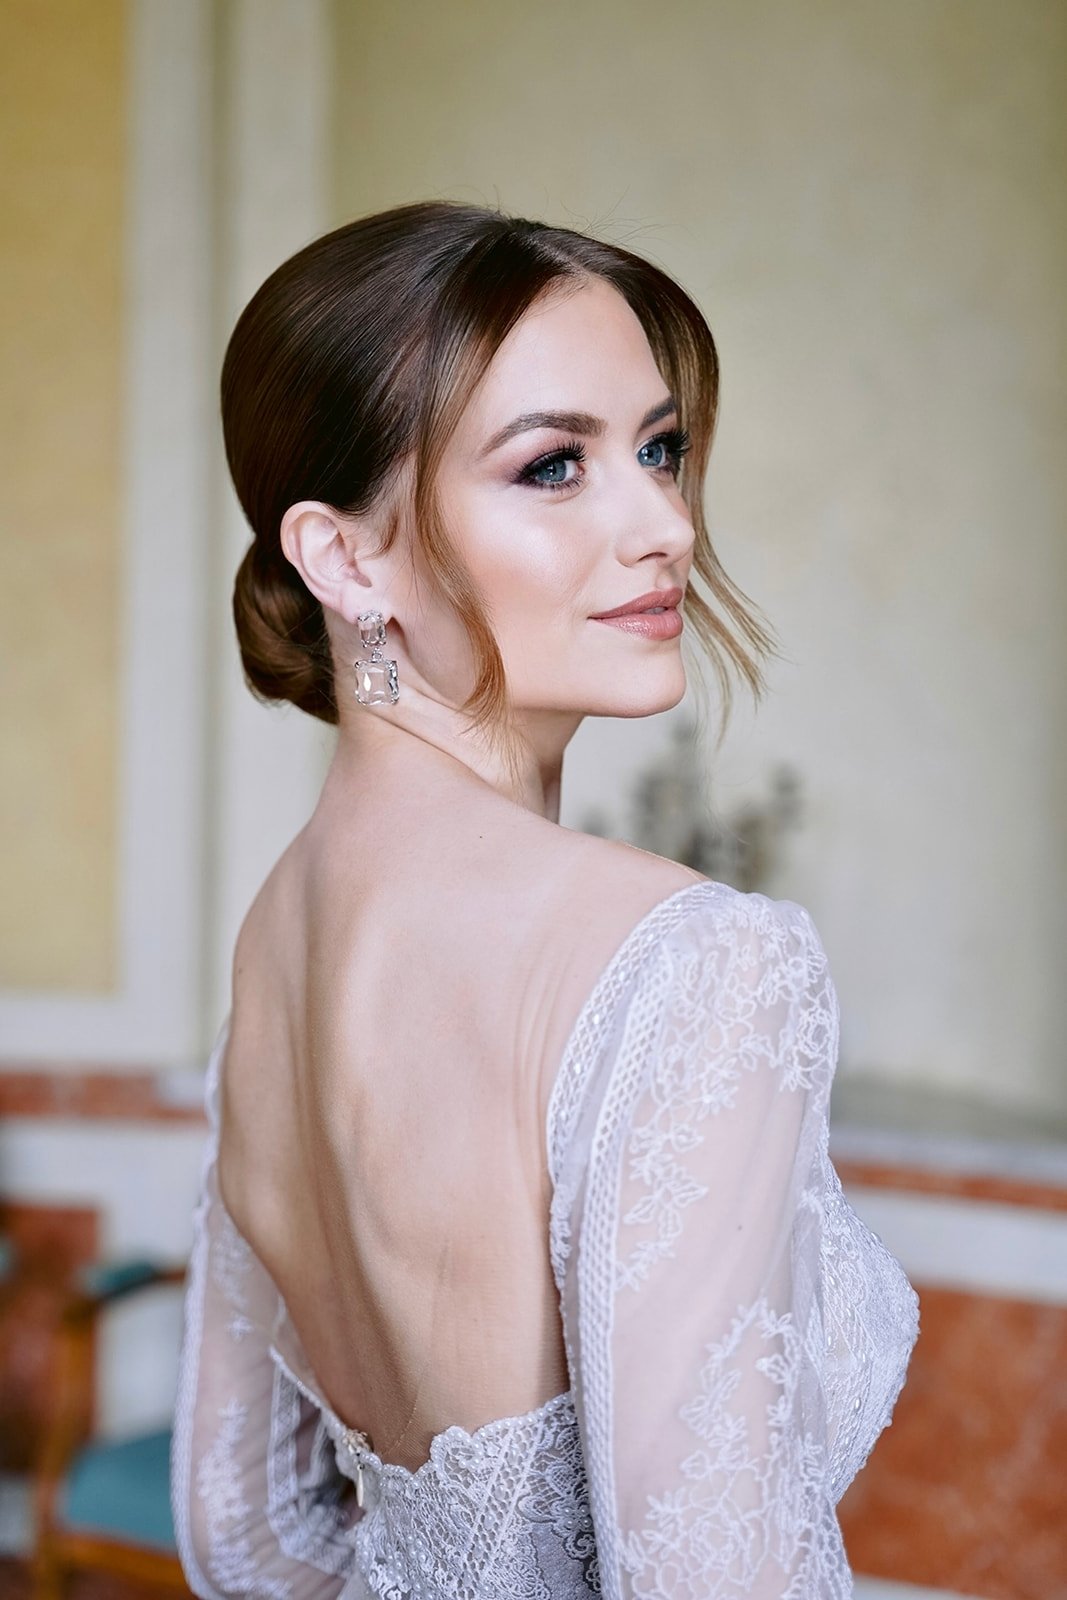 This one is for the glamorous brides who want to make a statement with their bridal look!

Think defined eyes, fluffy lashes, soft contour, glowing skin, the perfect nude lip, a classic low bun, and soft but defined face-framing to draw attention to 